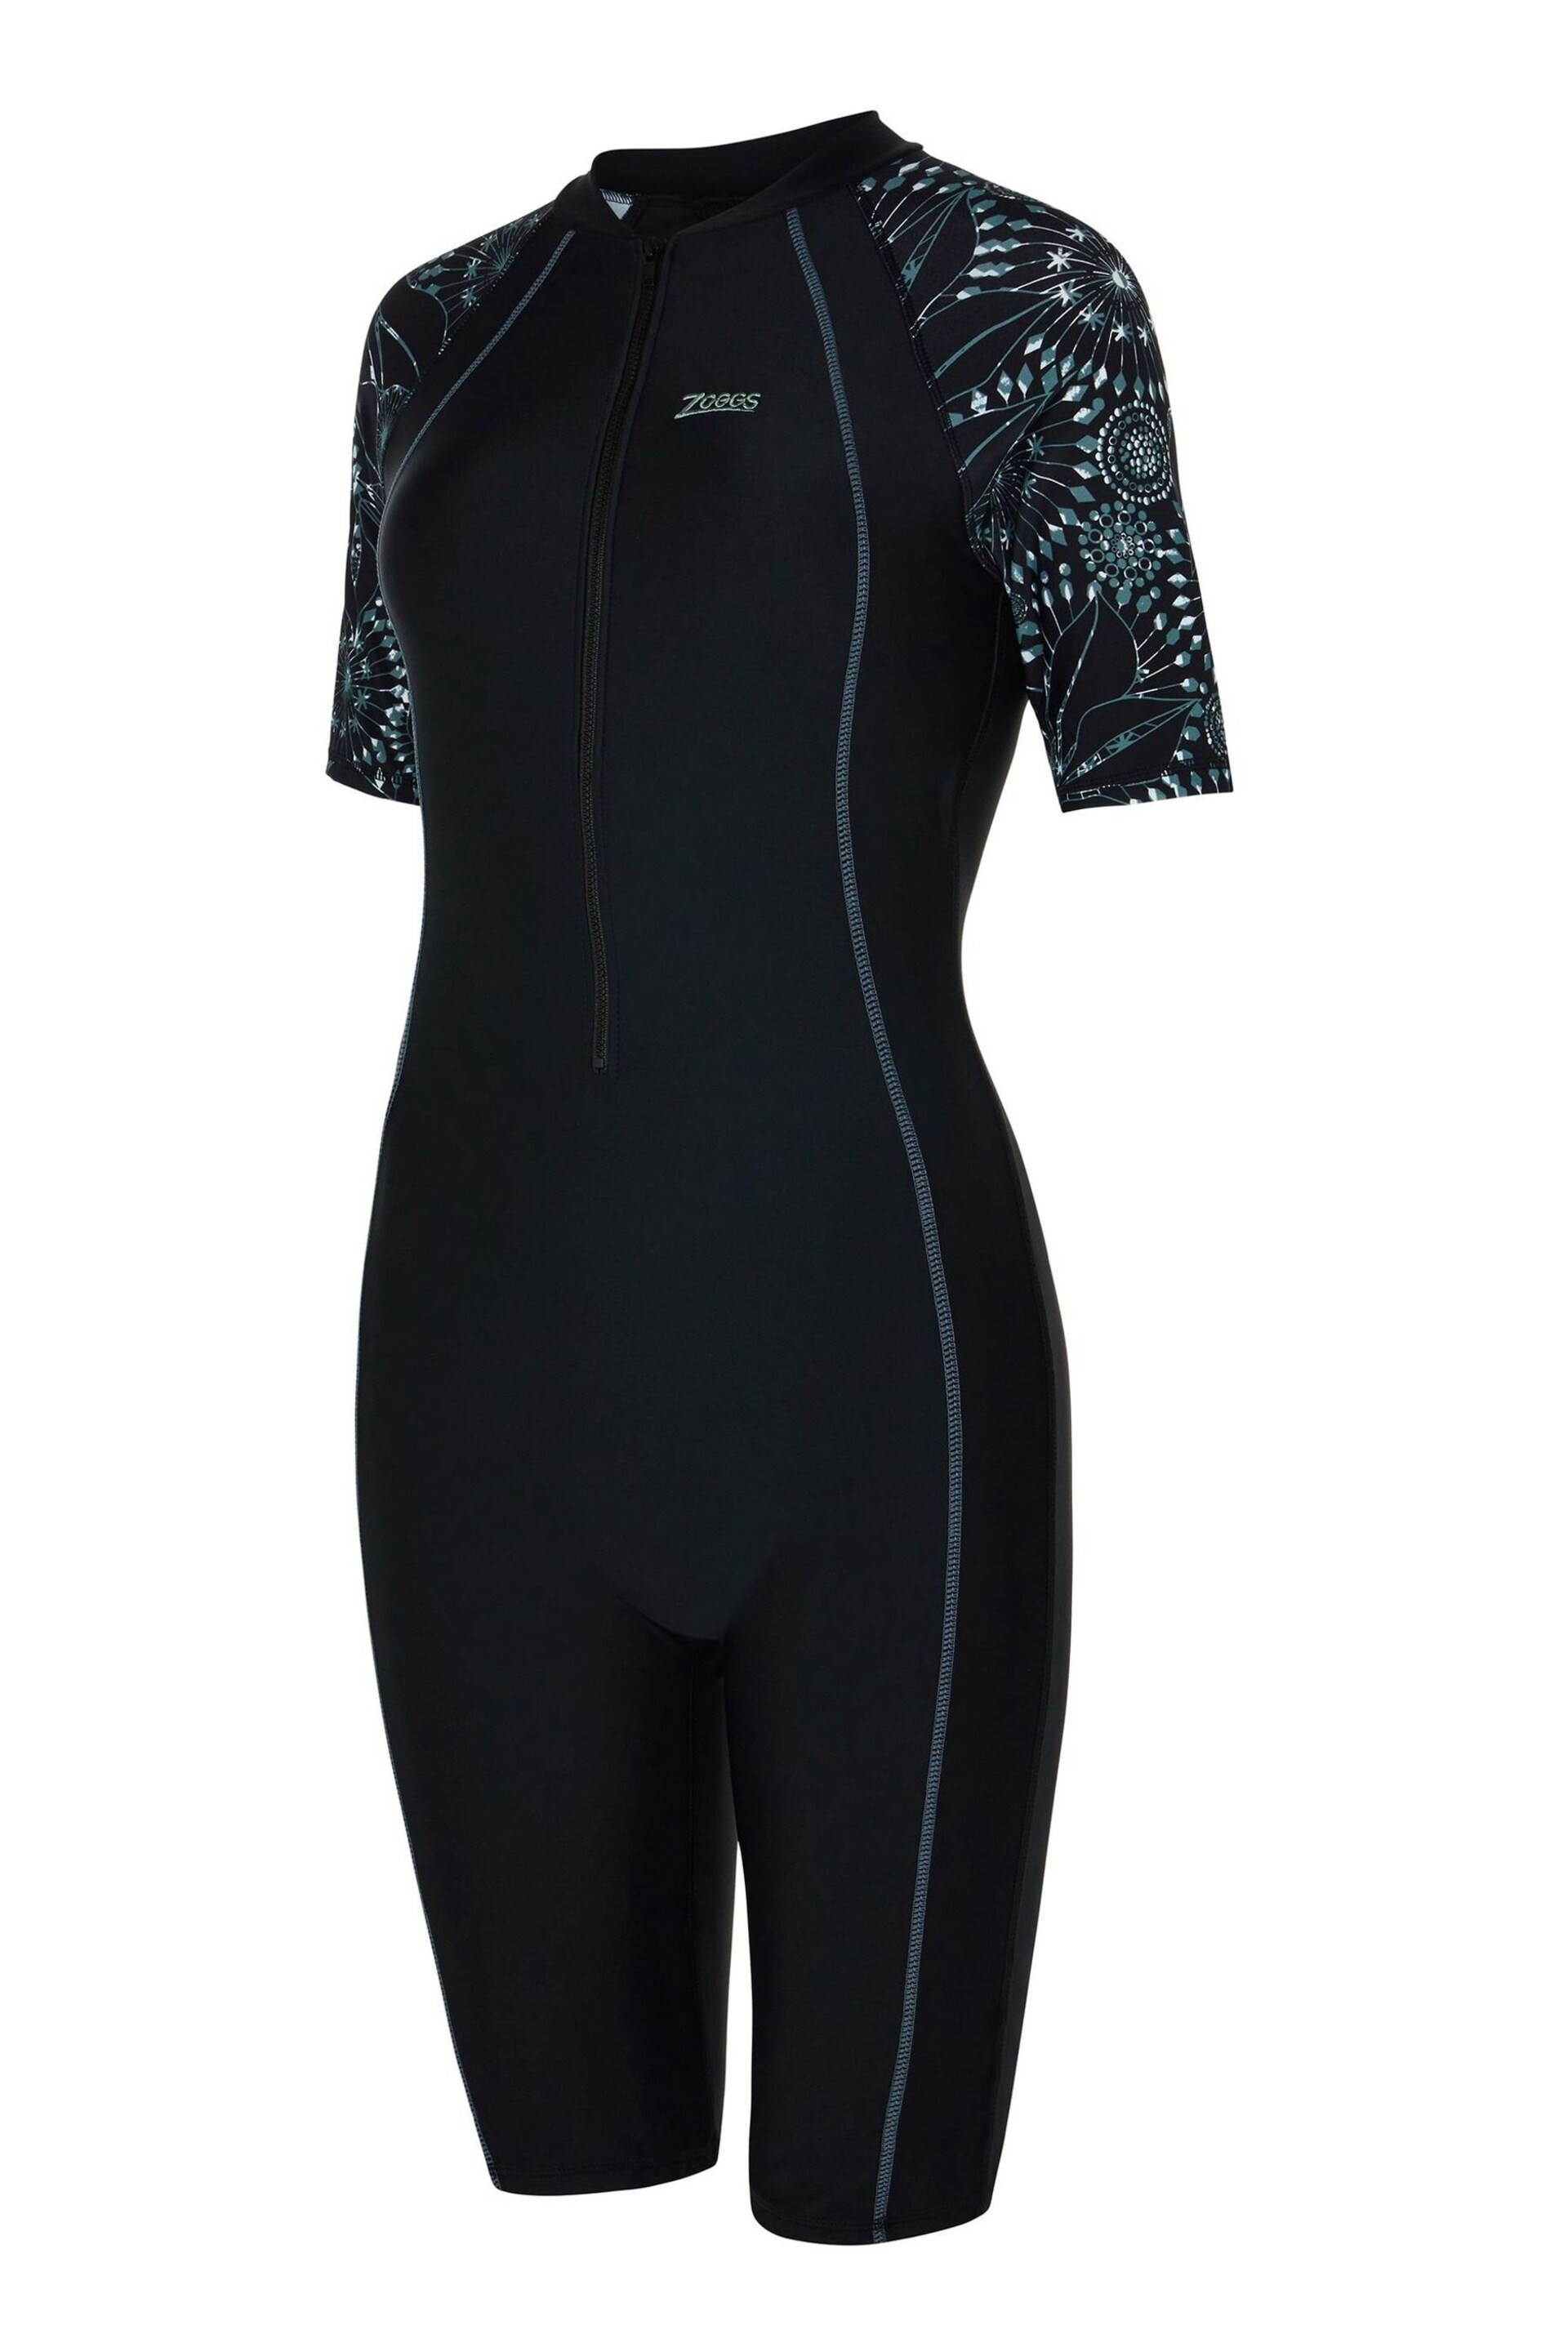 Zoggs Stellar UPF50+ Kneesuit Black Swimsuit With Removable Foam Cup Support - Image 5 of 6